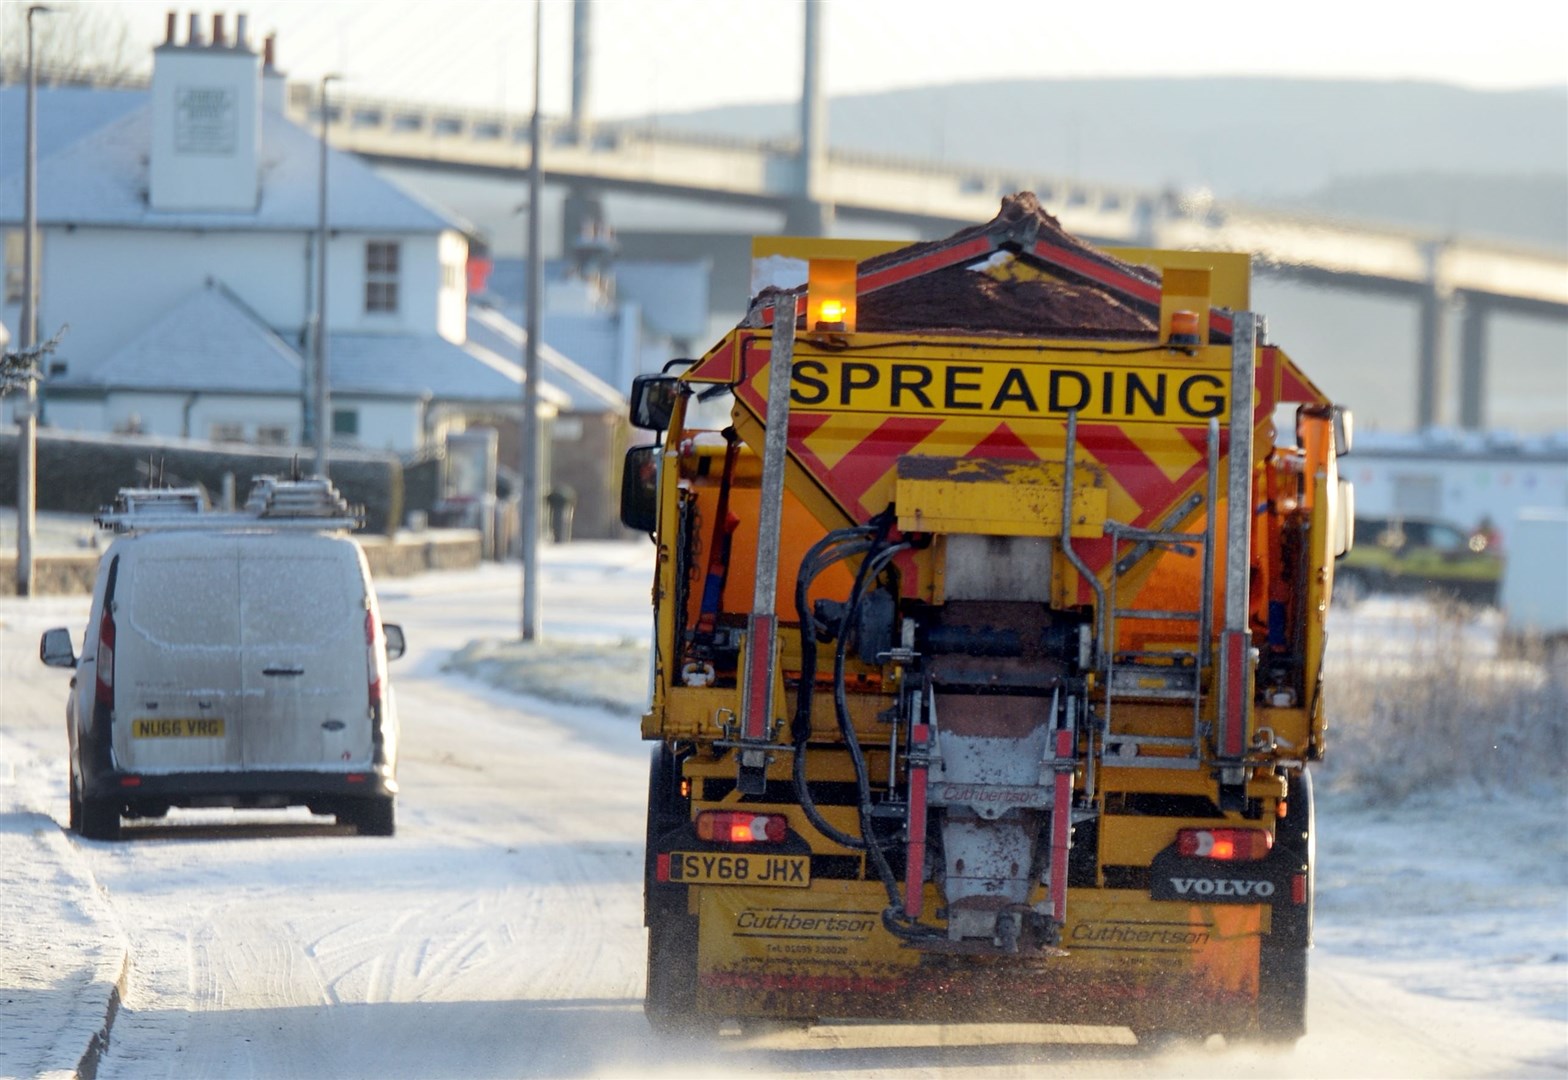 A wintry scene as a gritter works on the Black Isle.